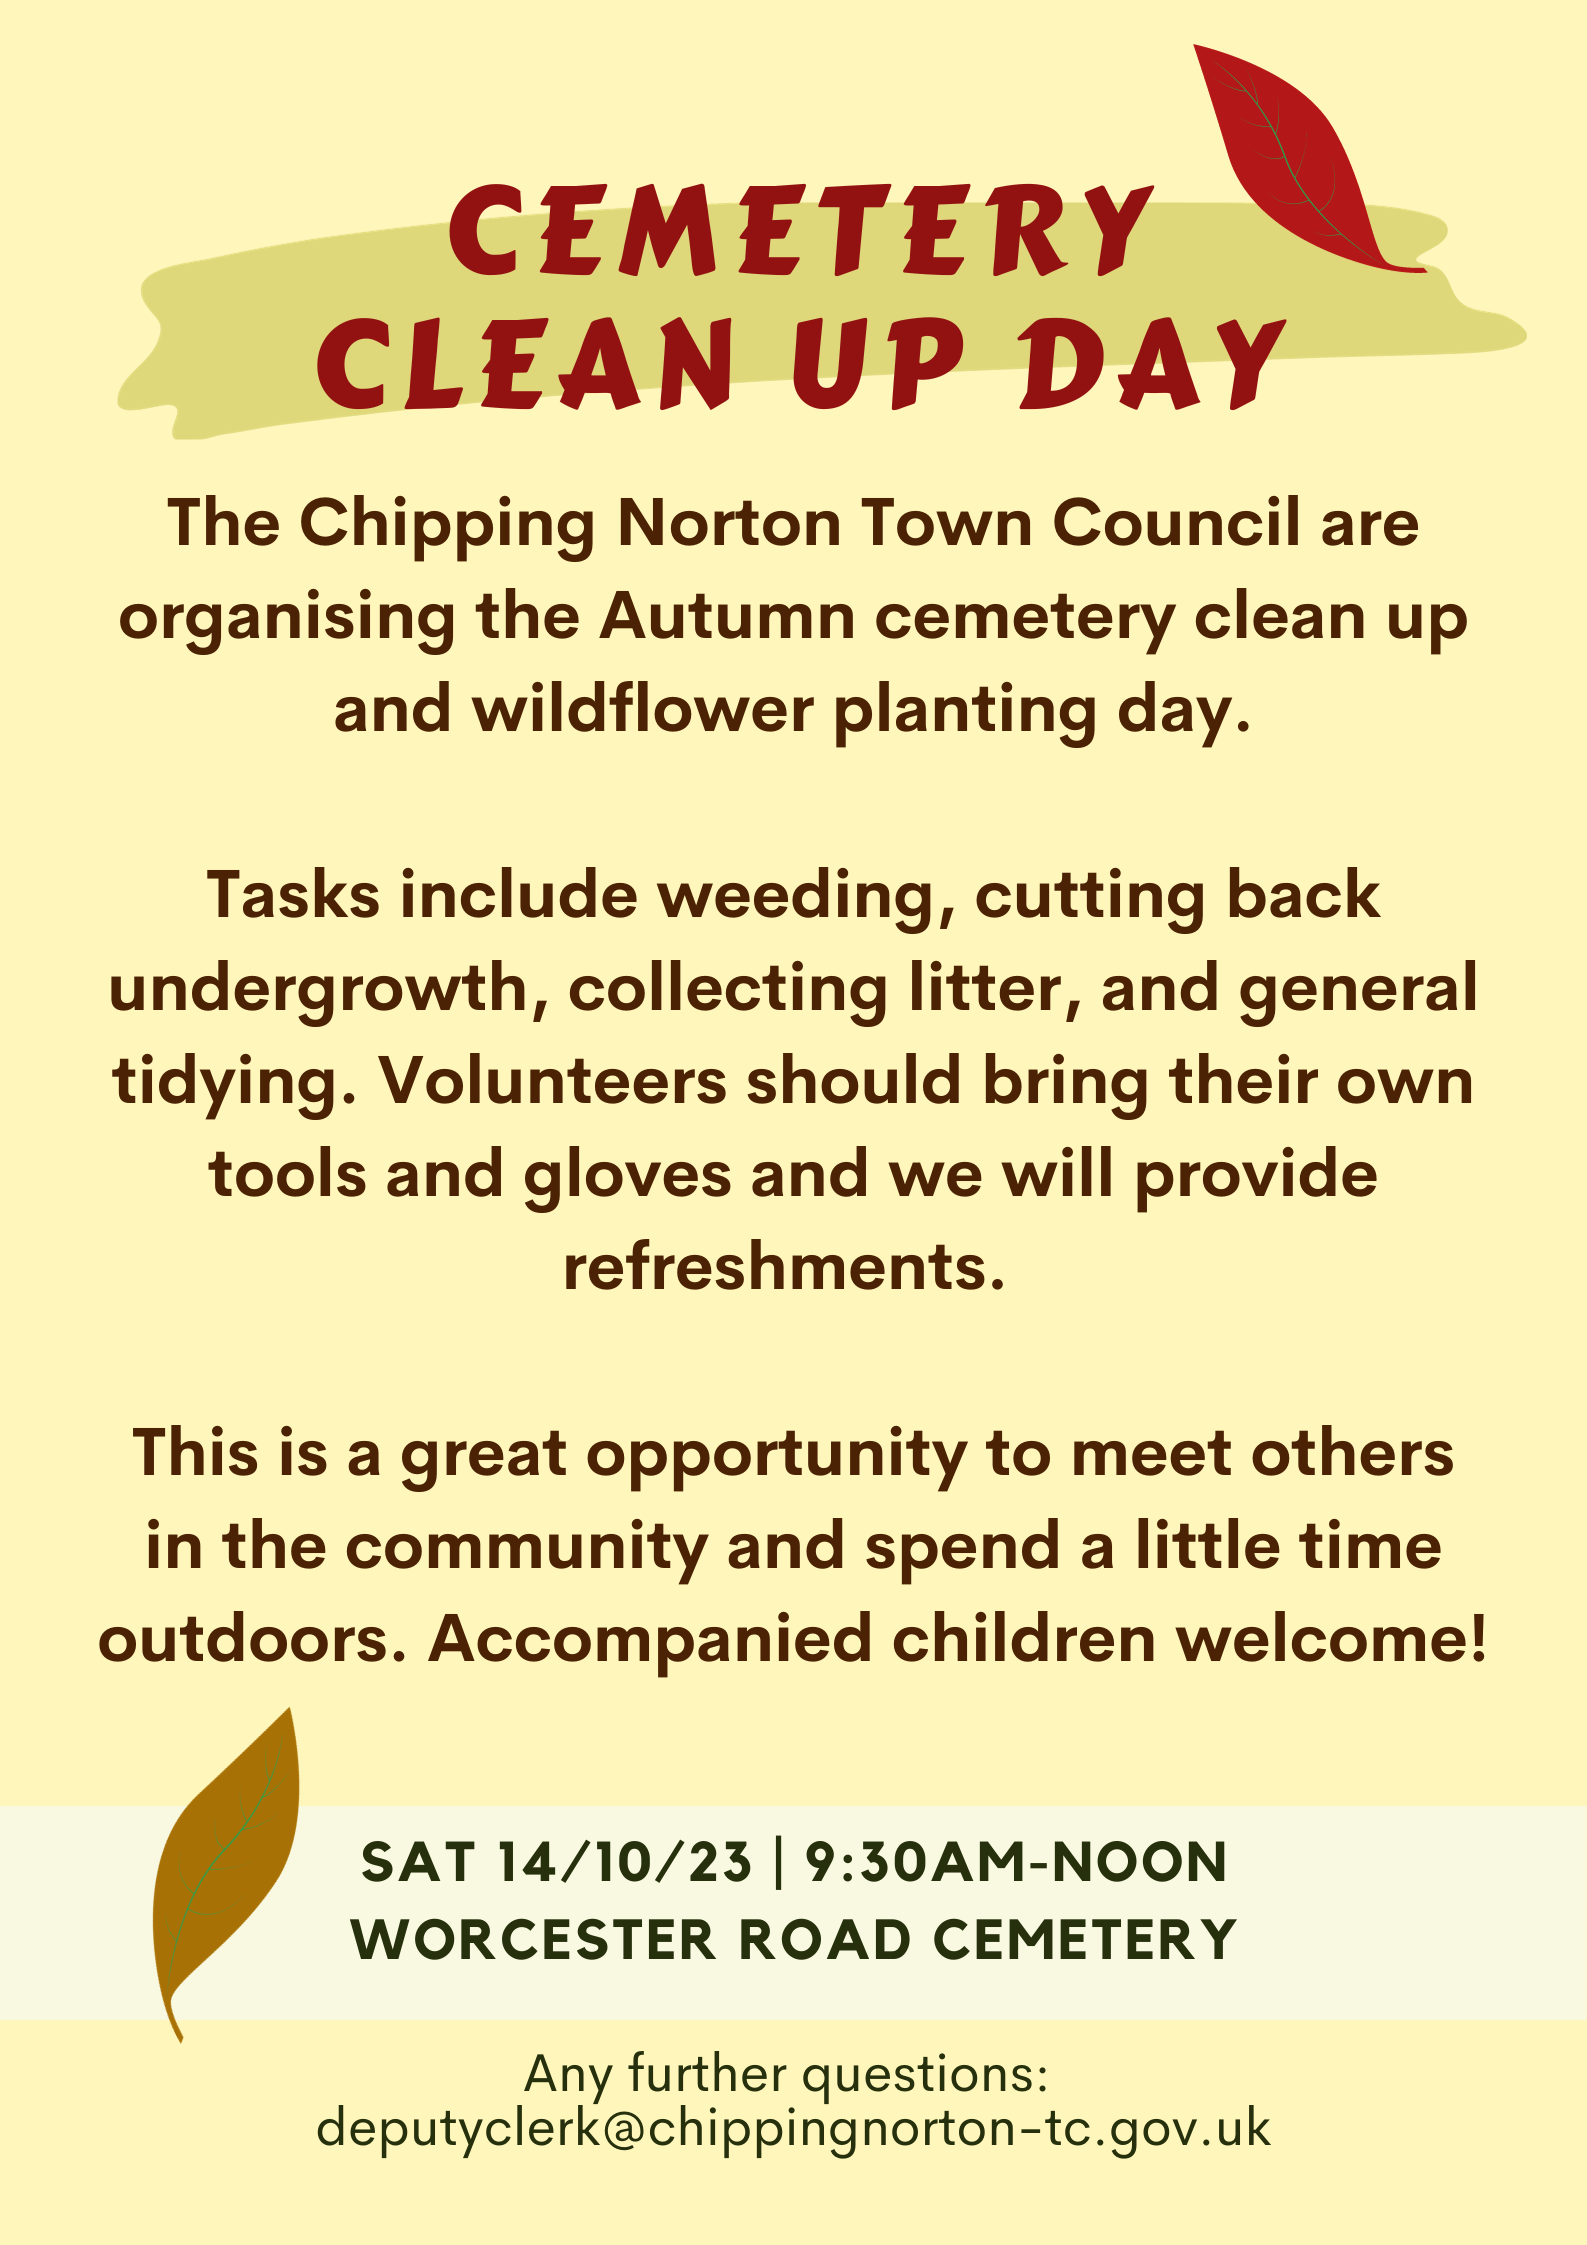 The Chipping Norton Town Council are organising the Autumn cemetery clean up and wildflower planting day.

Tasks include weeding, cutting back undergrowth, collecting litter, and general tidying. Volunteers should bring their own tools and gloves and we will provide refreshments. 

This is a great opportunity to meet others in the community and spend a little time outdoors. Accompanied children welcome!
